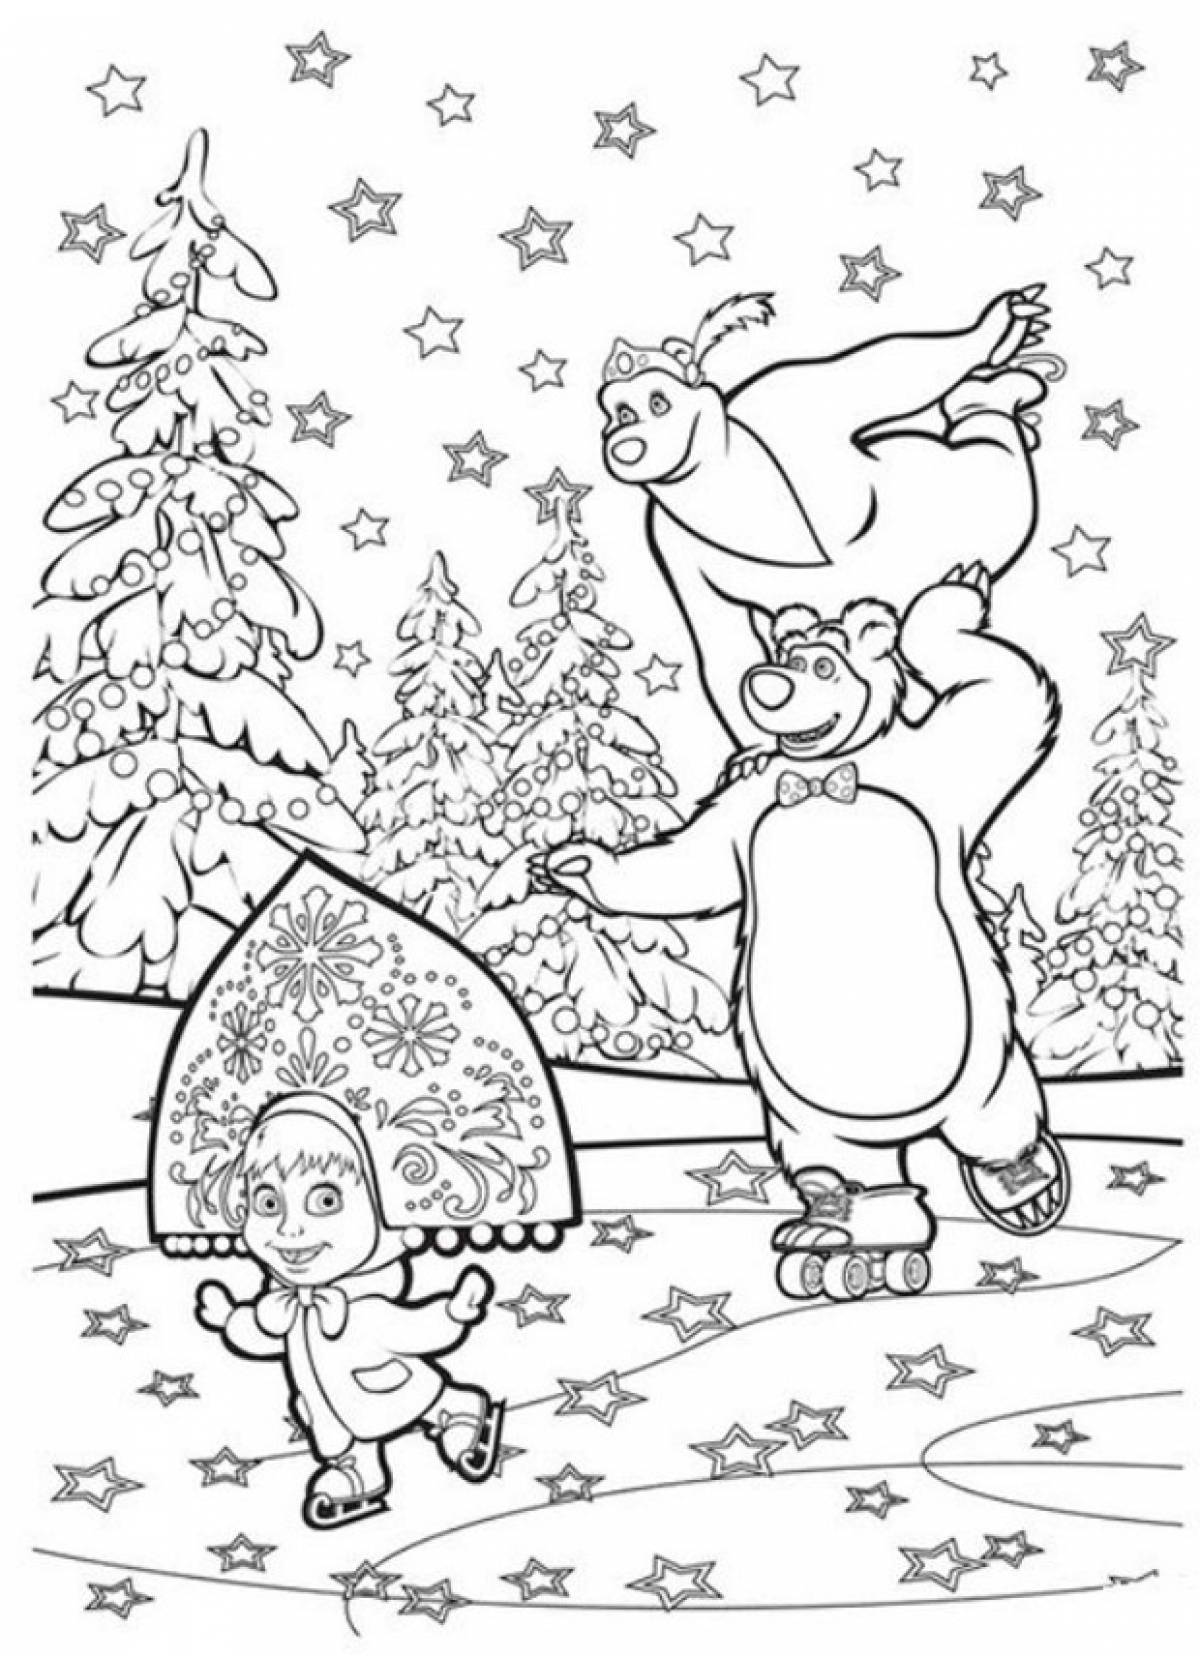 Coloring page Masha and the bear are dancing